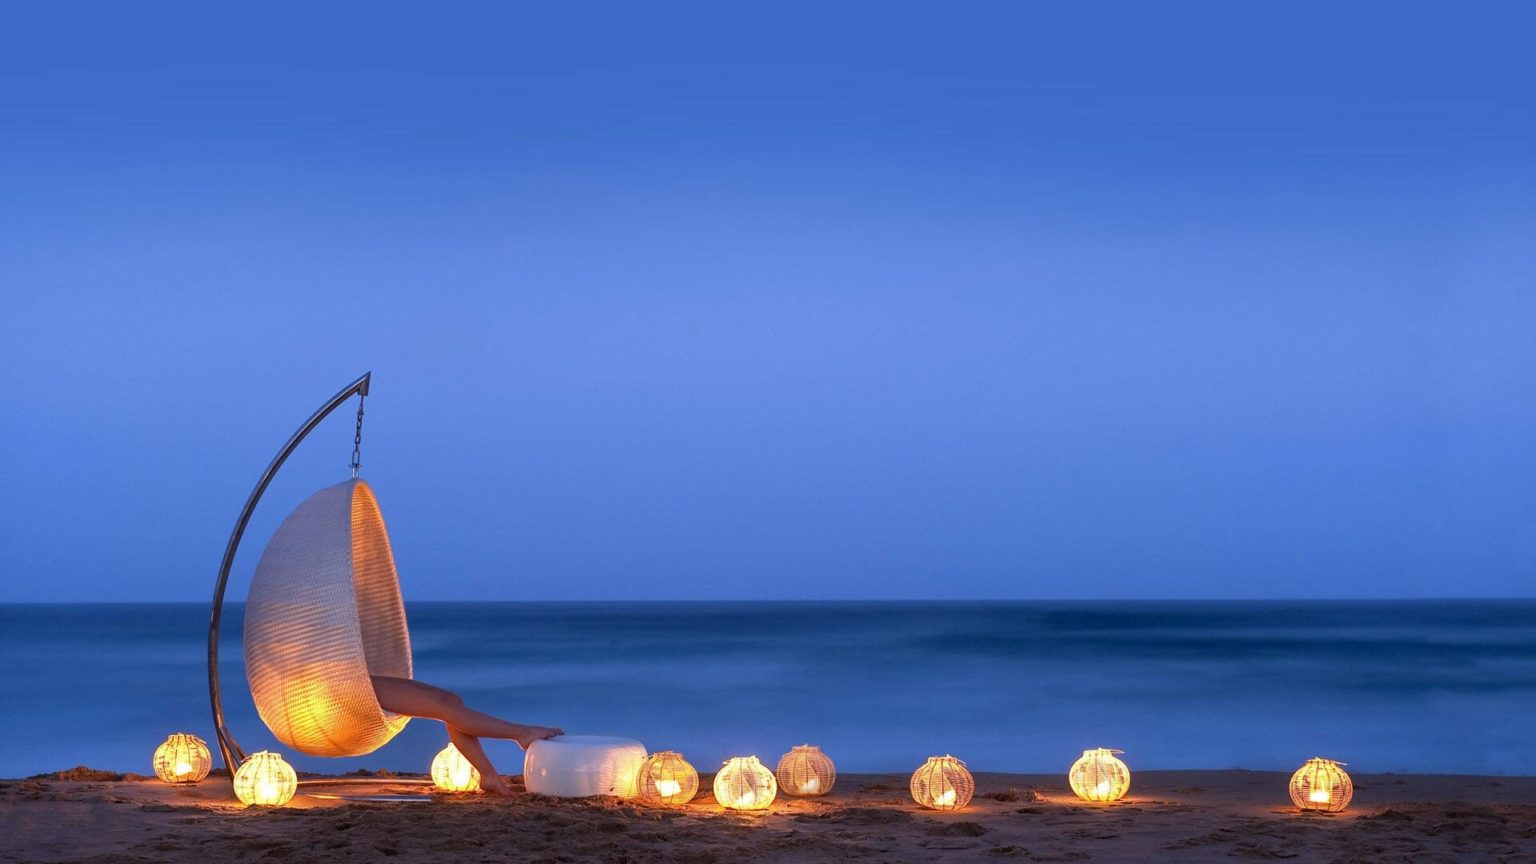 woman in a pearl shaped chair sits on the beach with lanterns at night